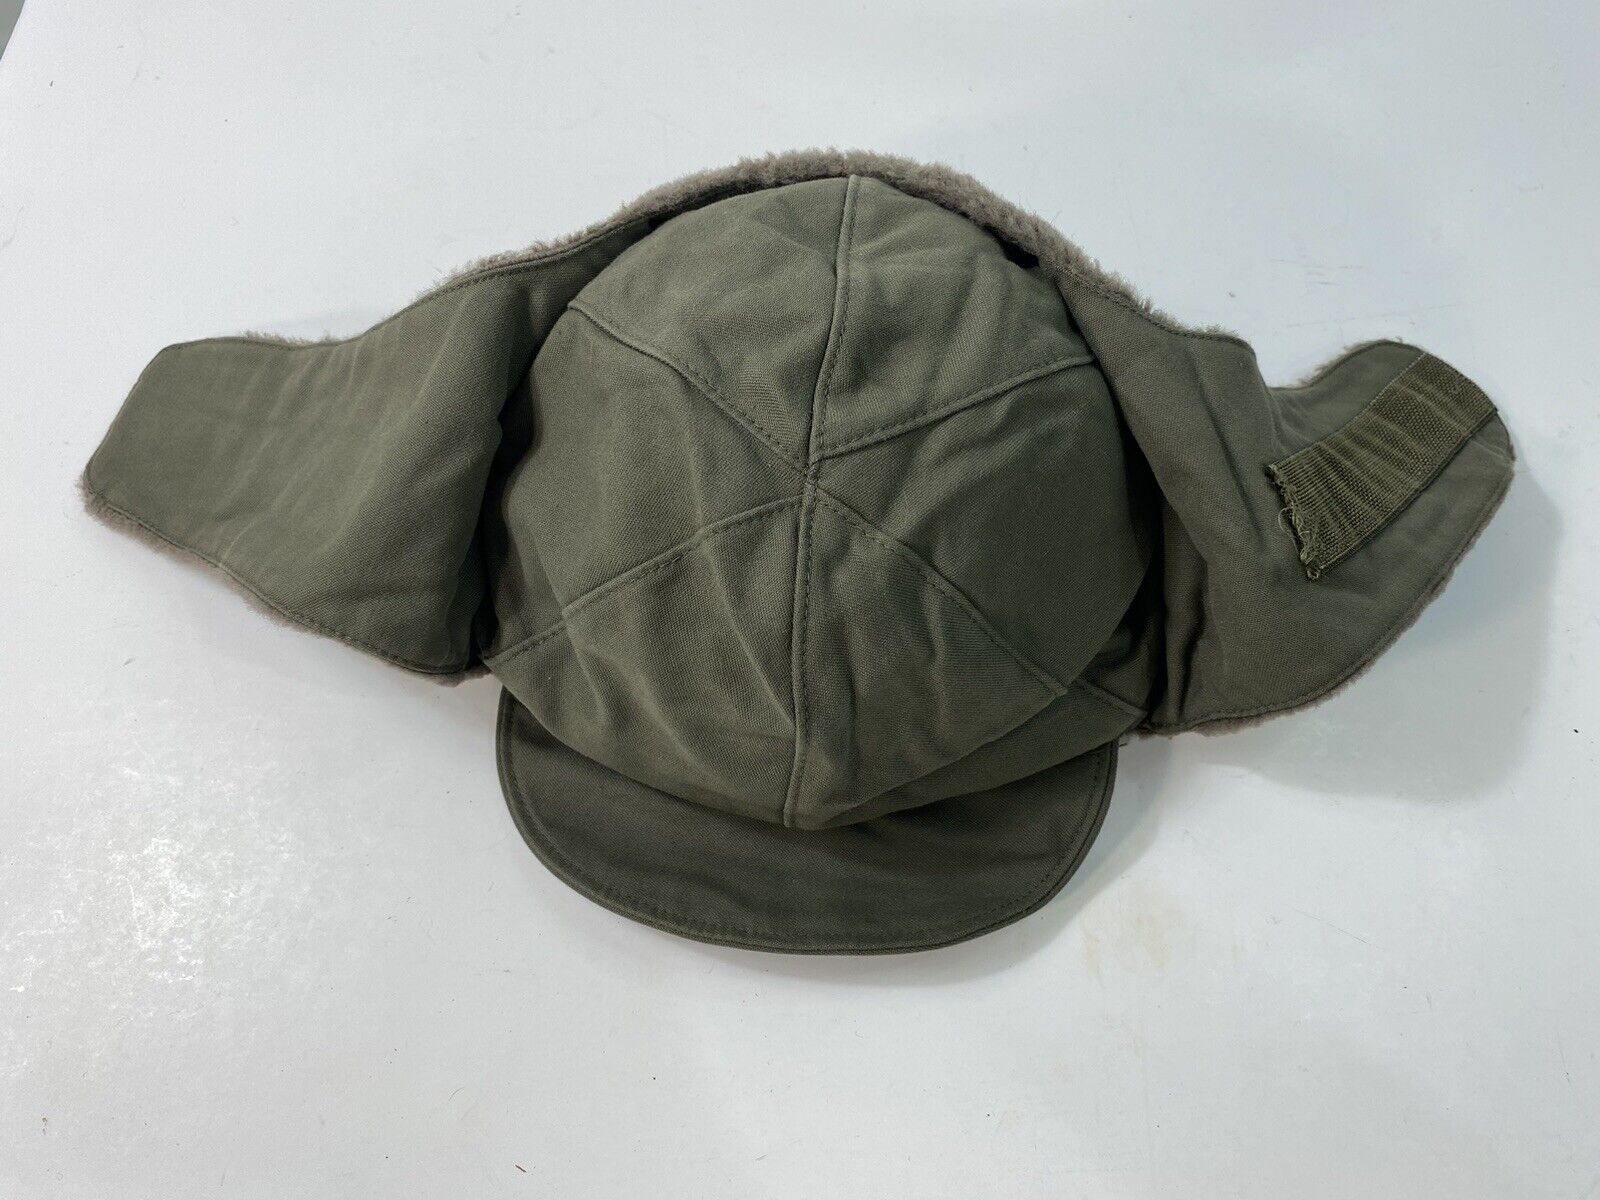 Genuine German Army Military Winter Pile Cap Olive - Size 57. SEE DESCRIPTION